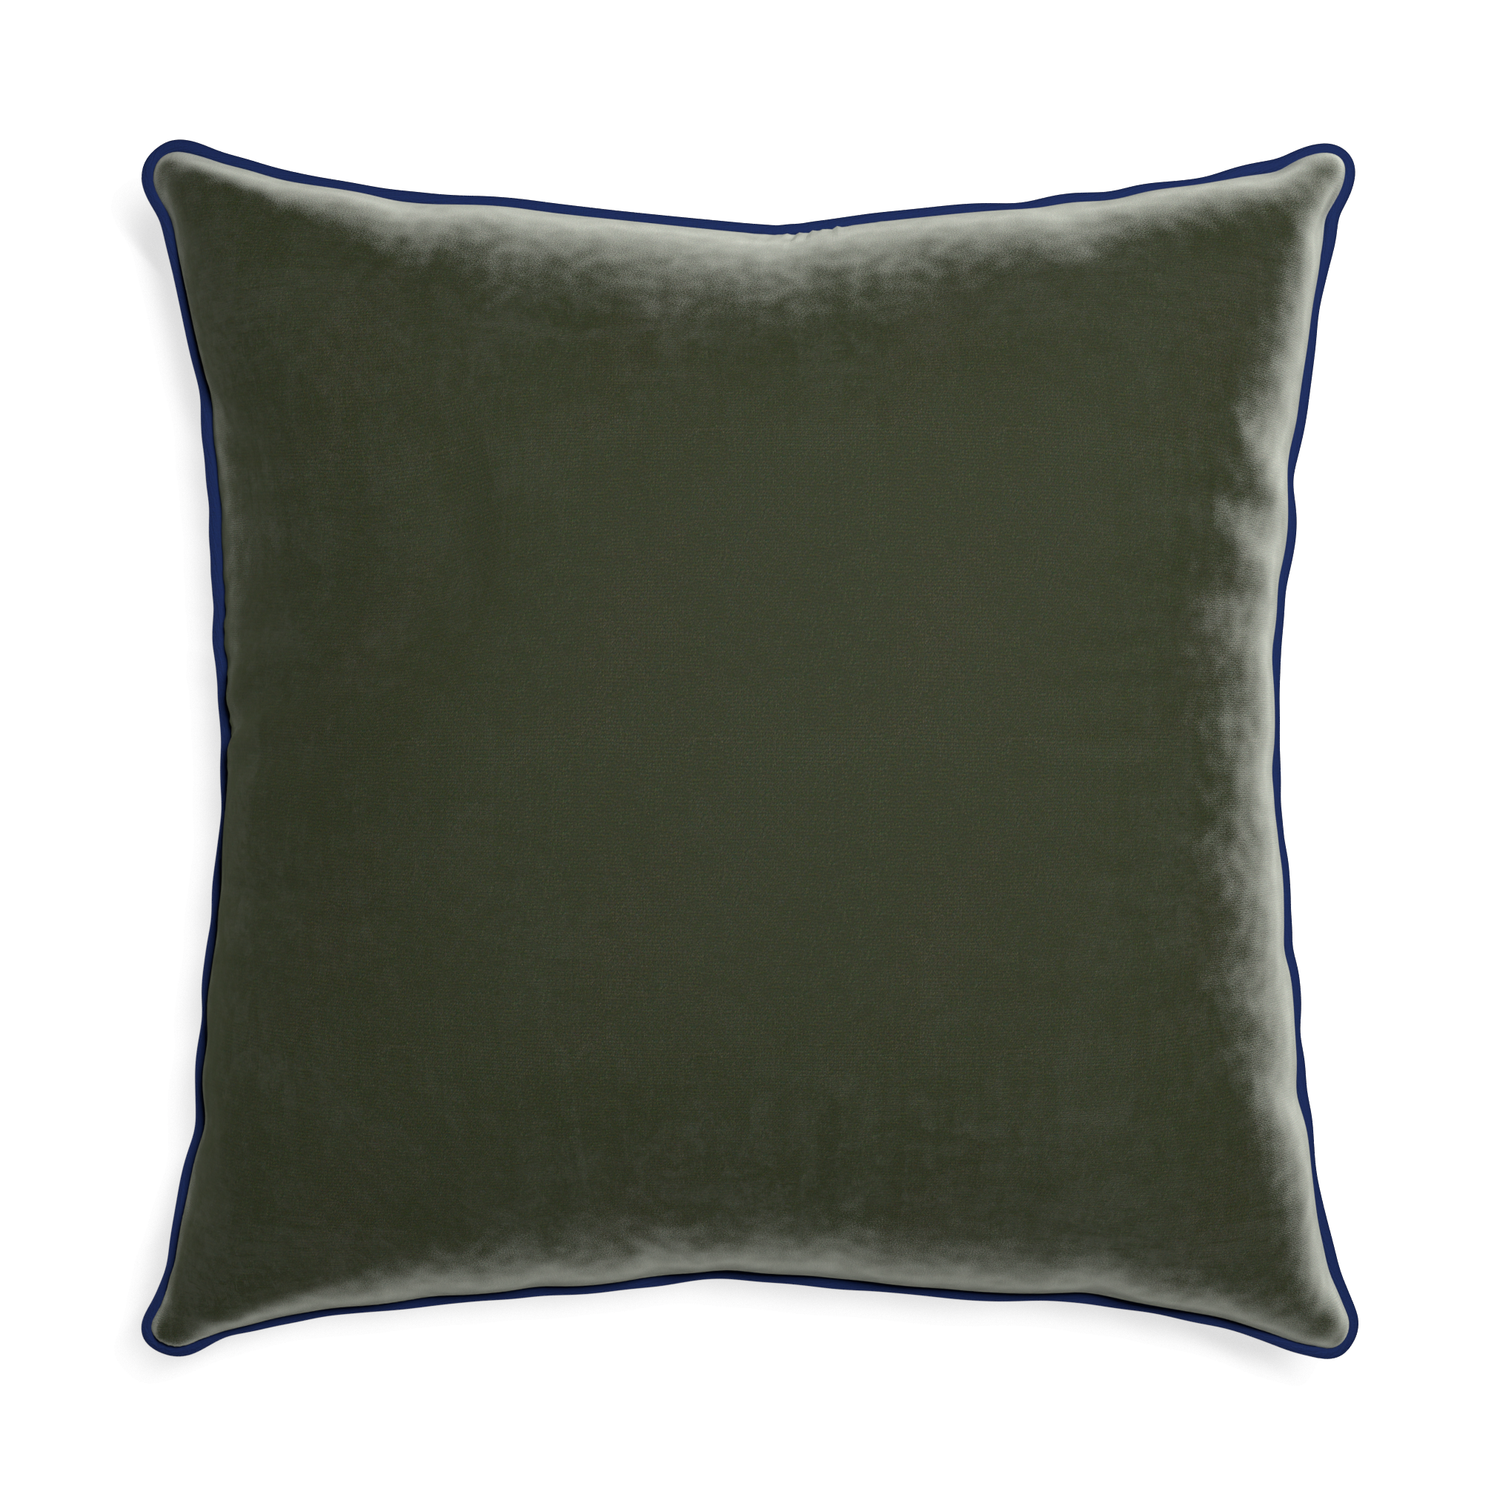 square fern green velvet pillow with navy blue piping